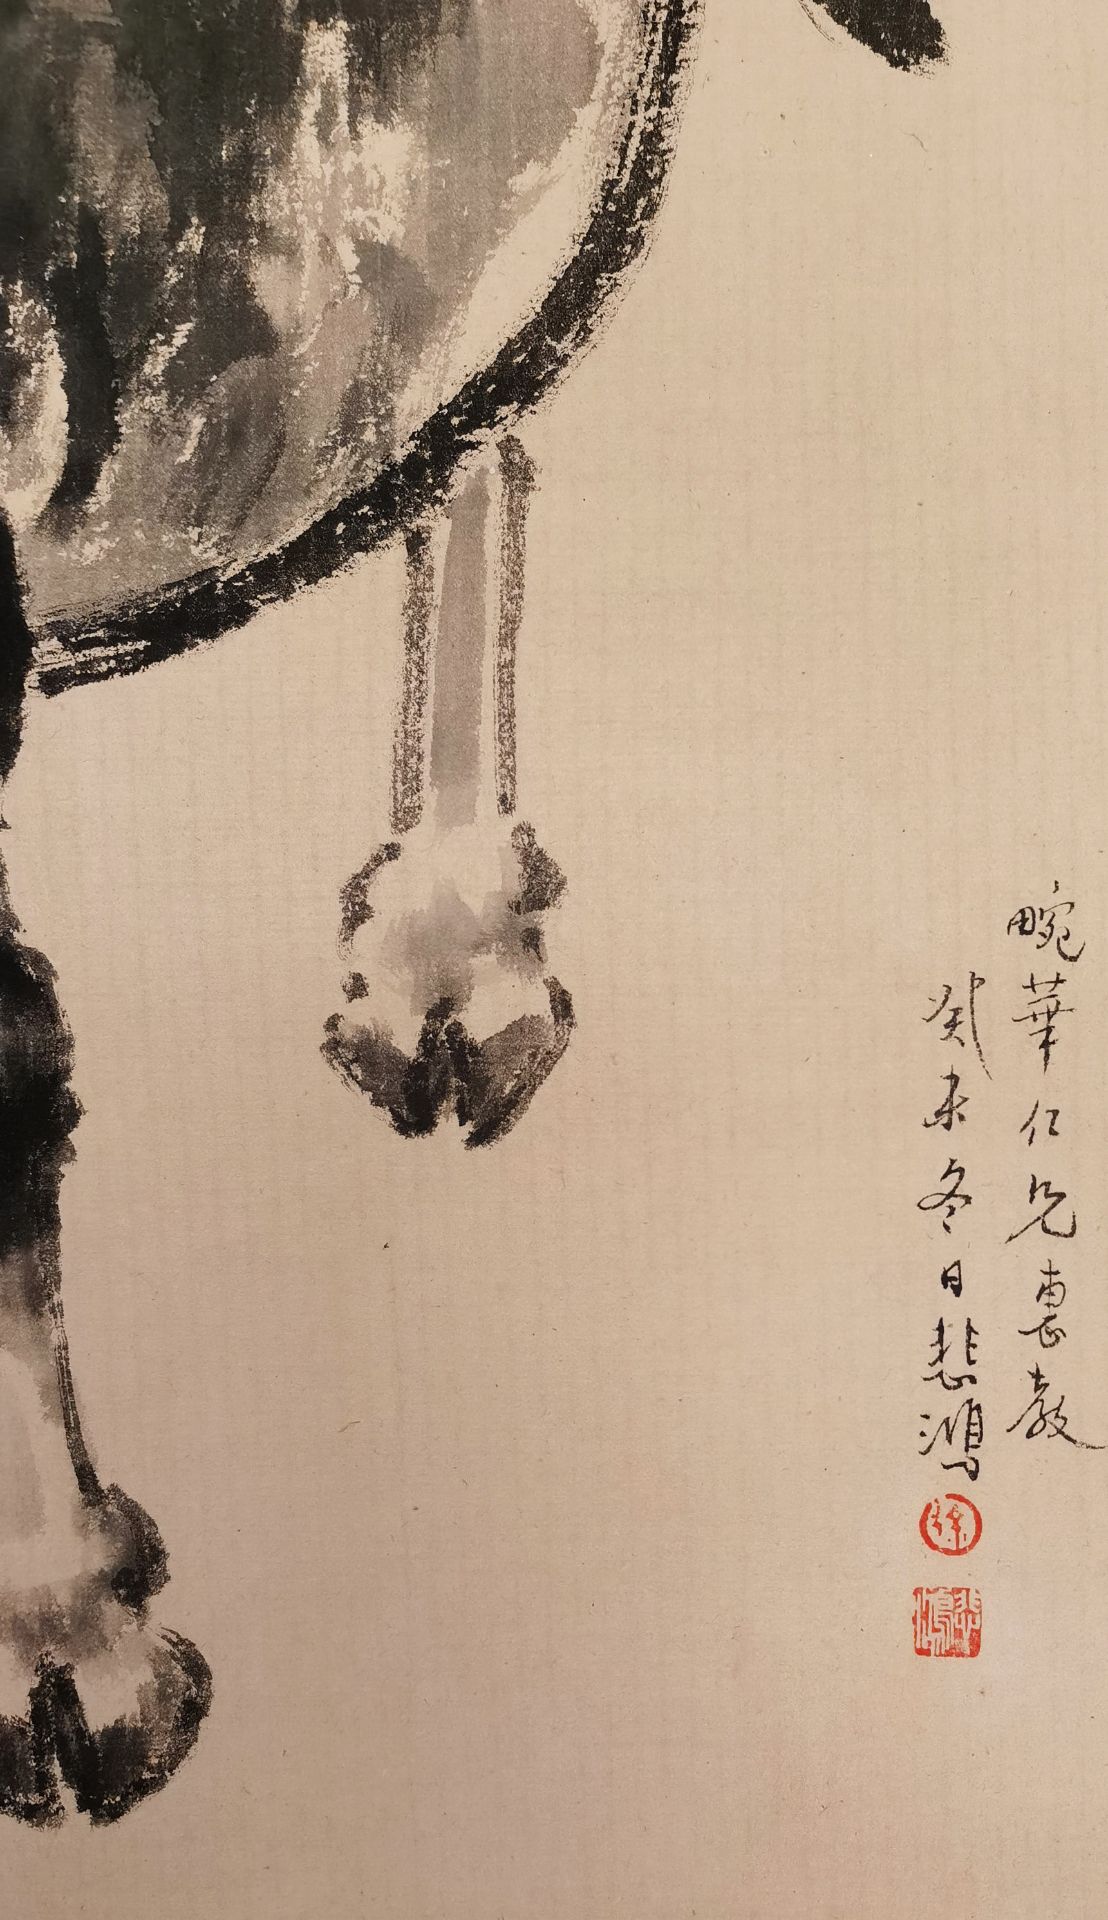 A Chinese Painting Signed Xu Beihong on Paper Album - Image 7 of 7